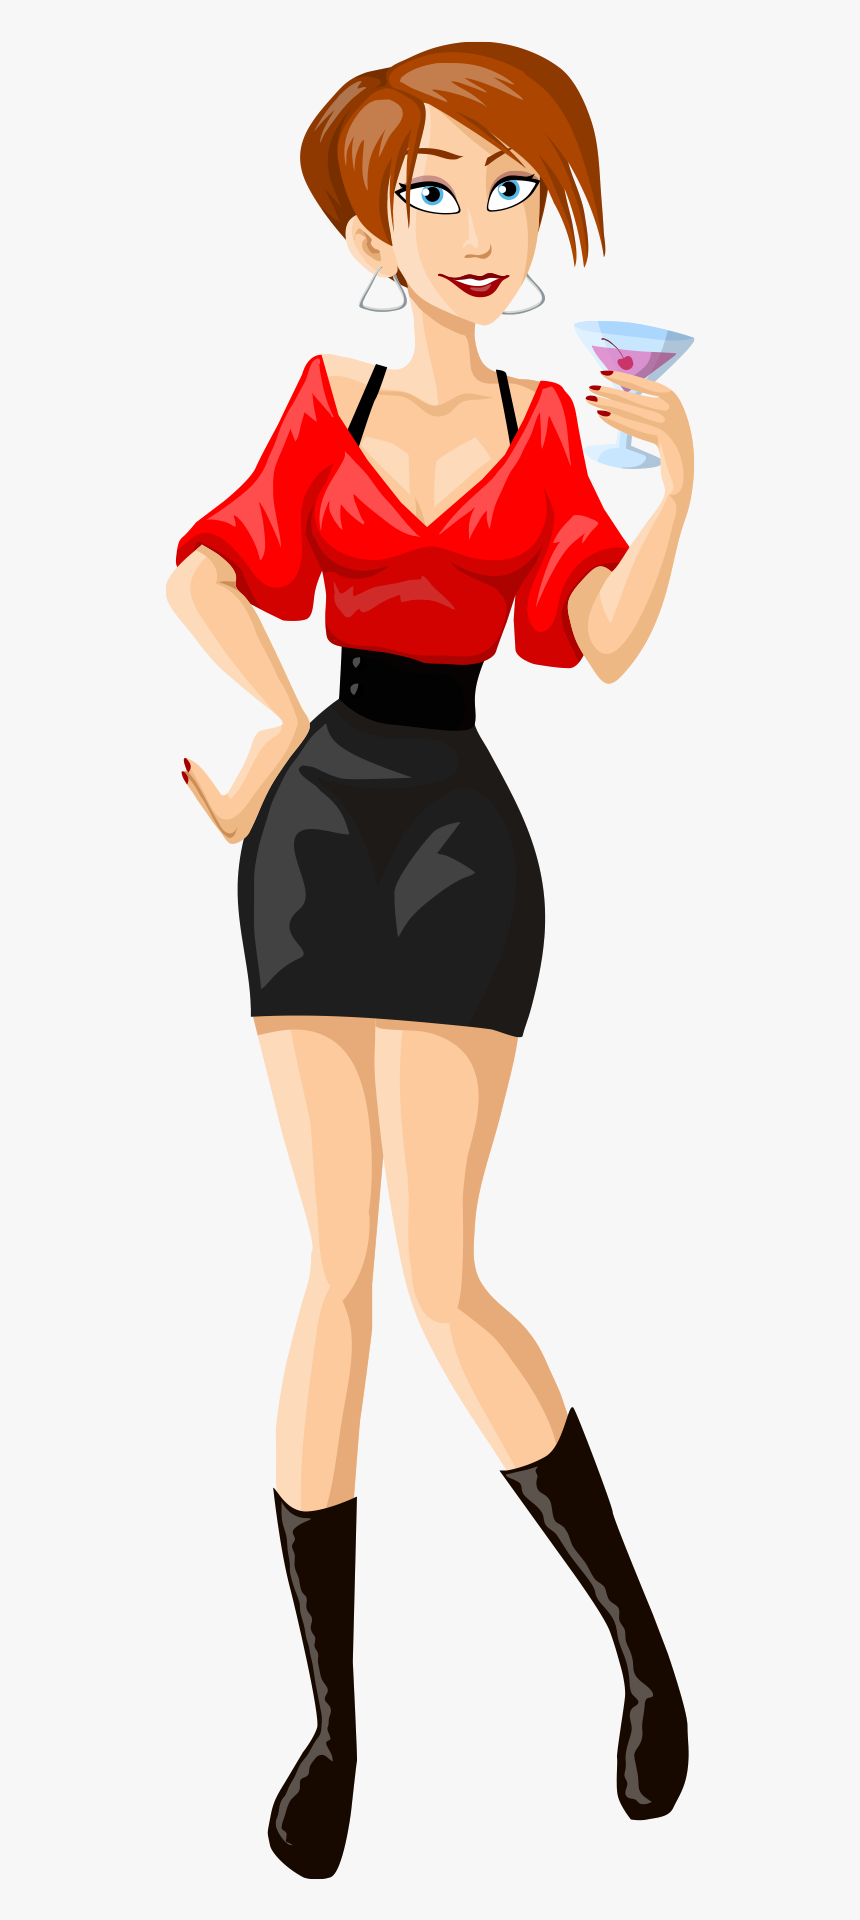 Girl Drinking Image Free - Girl Cartoon Images Png, Transparent Png, Free Download